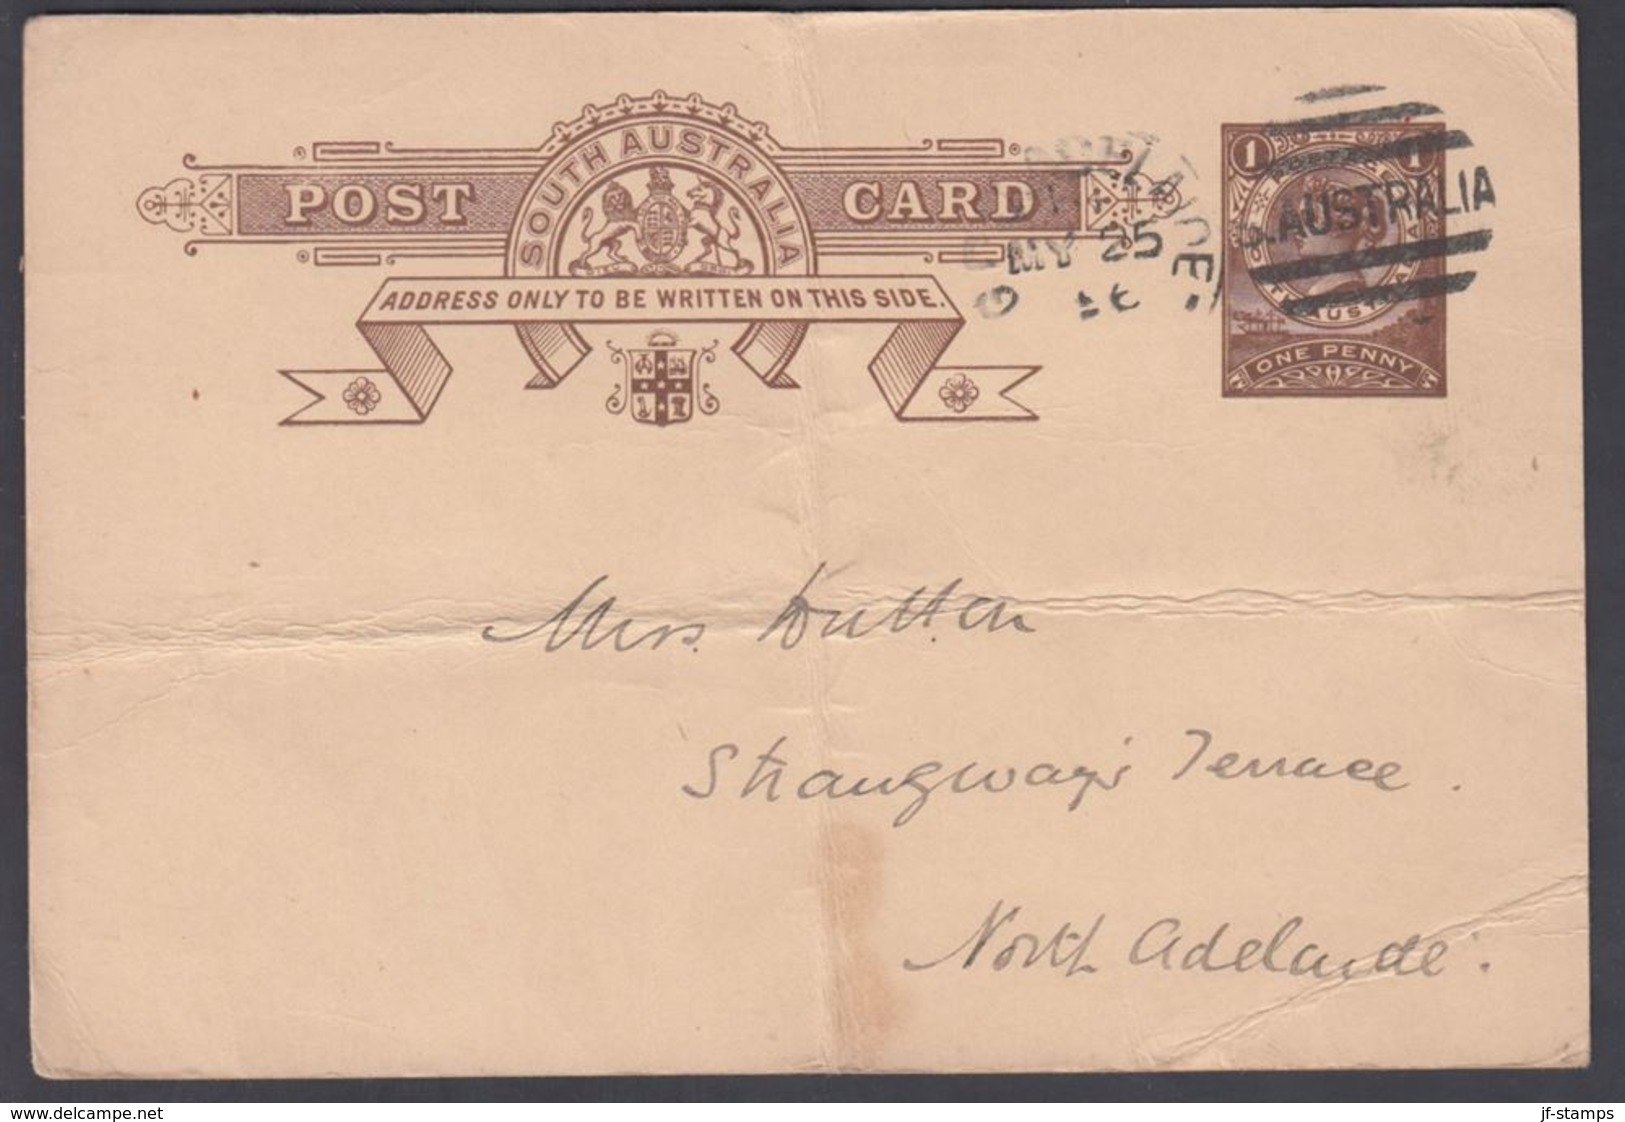 1896. QUEENSLAND AUSTRALIA  ONE PENNY POST CARD VICTORIA. MY 25 96.  () - JF321615 - Lettres & Documents